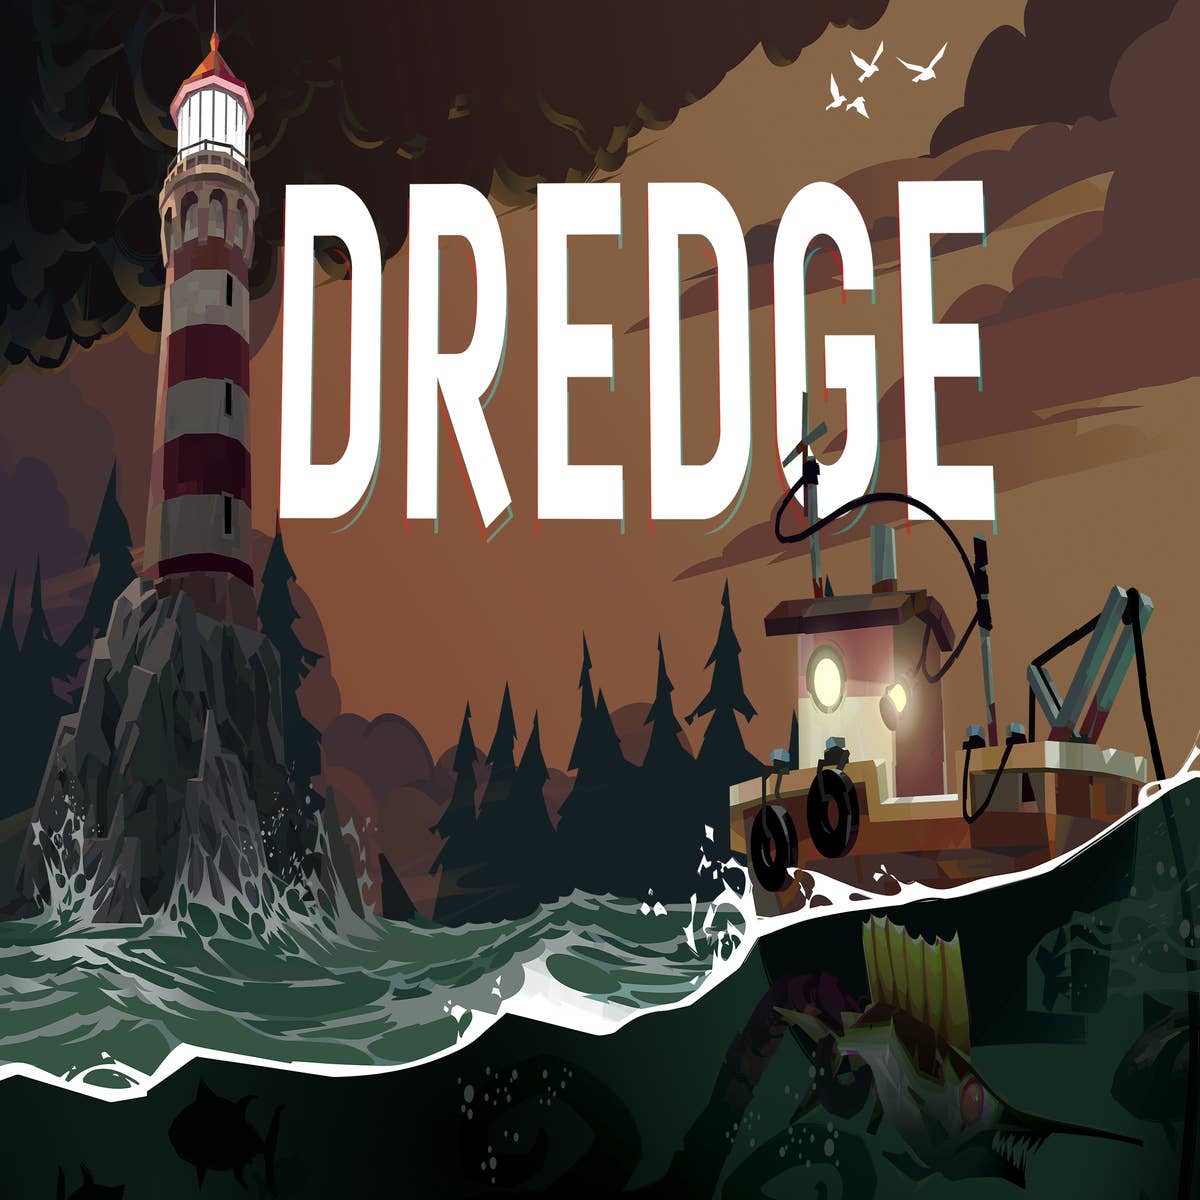 Fishing Horror Game 'Dredge' is one of 30 games coming to Switch this week